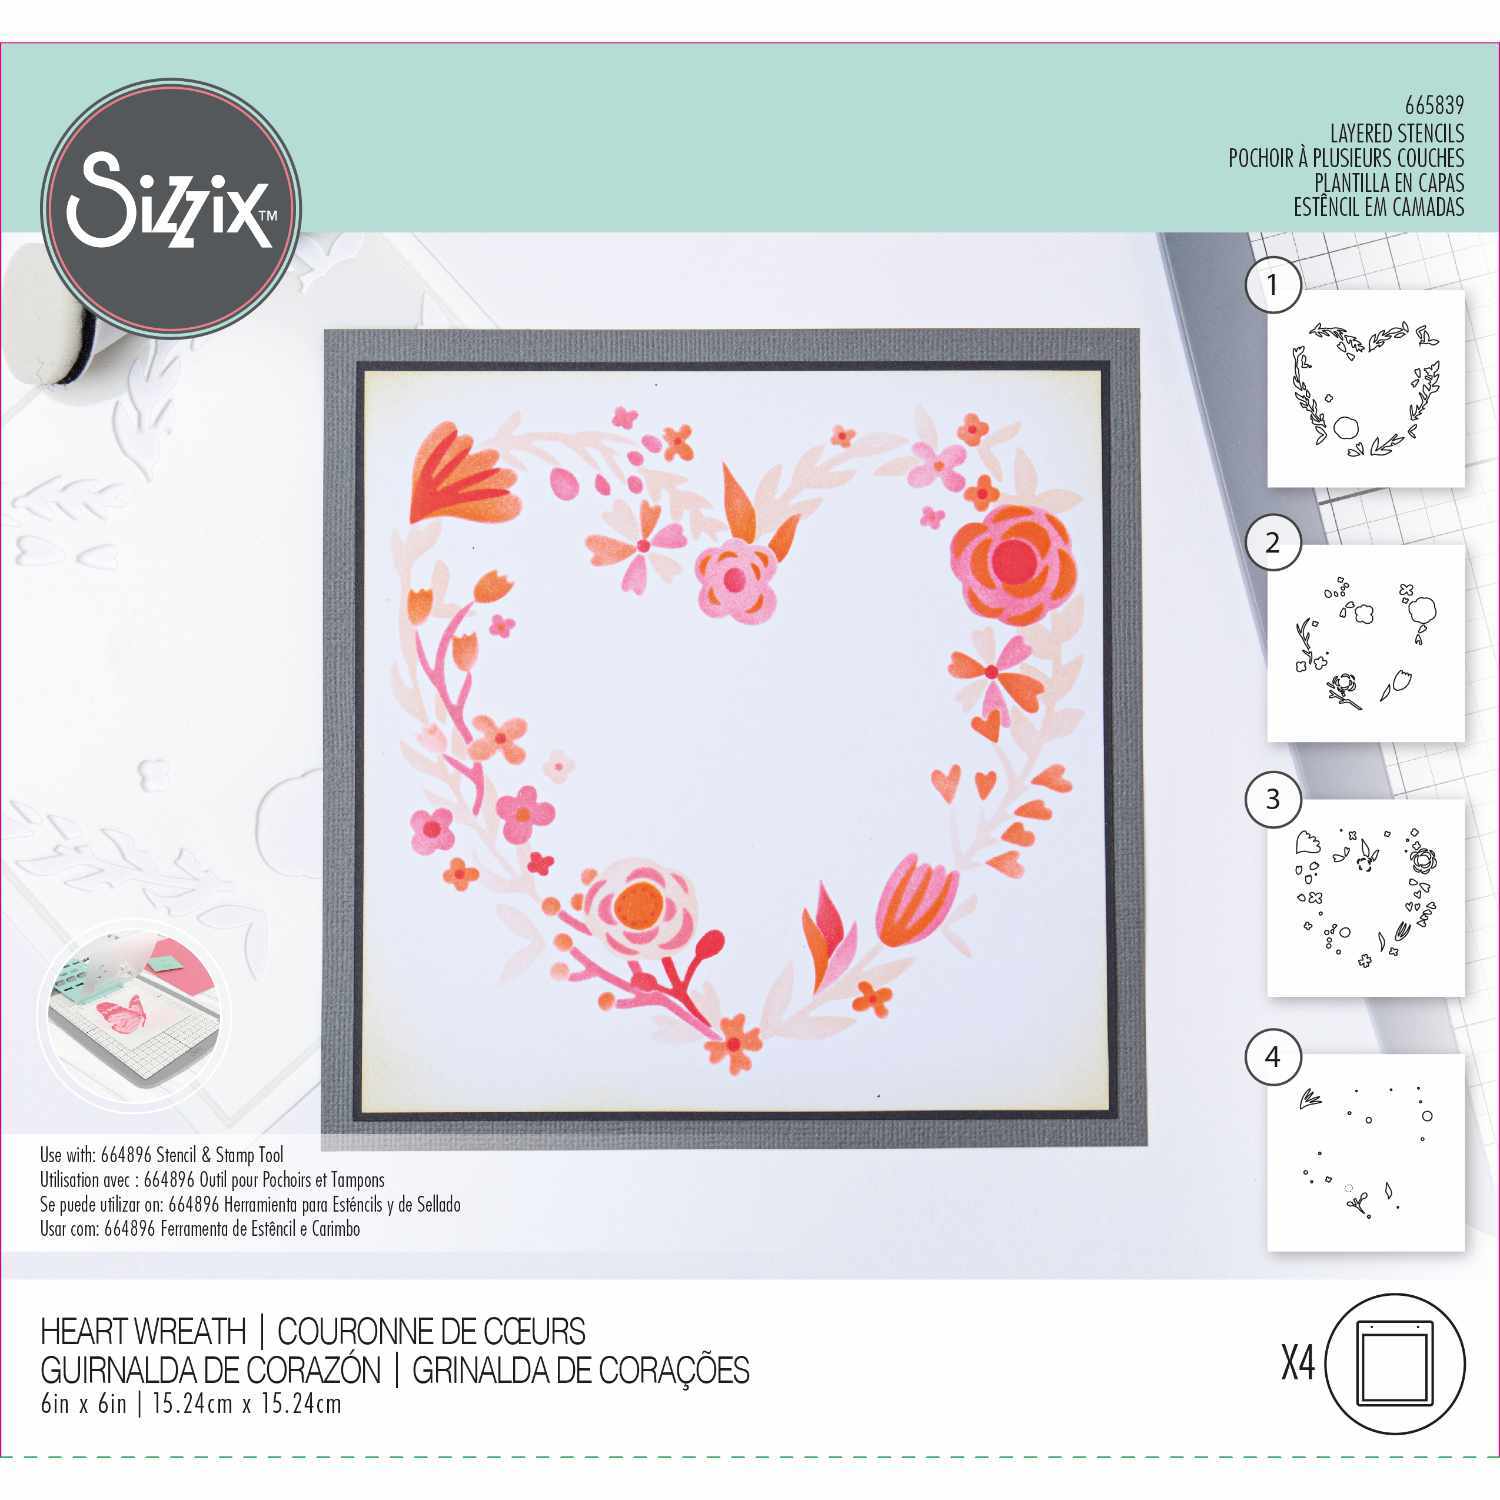 Layered Stencils Heart Wreath by Olivia